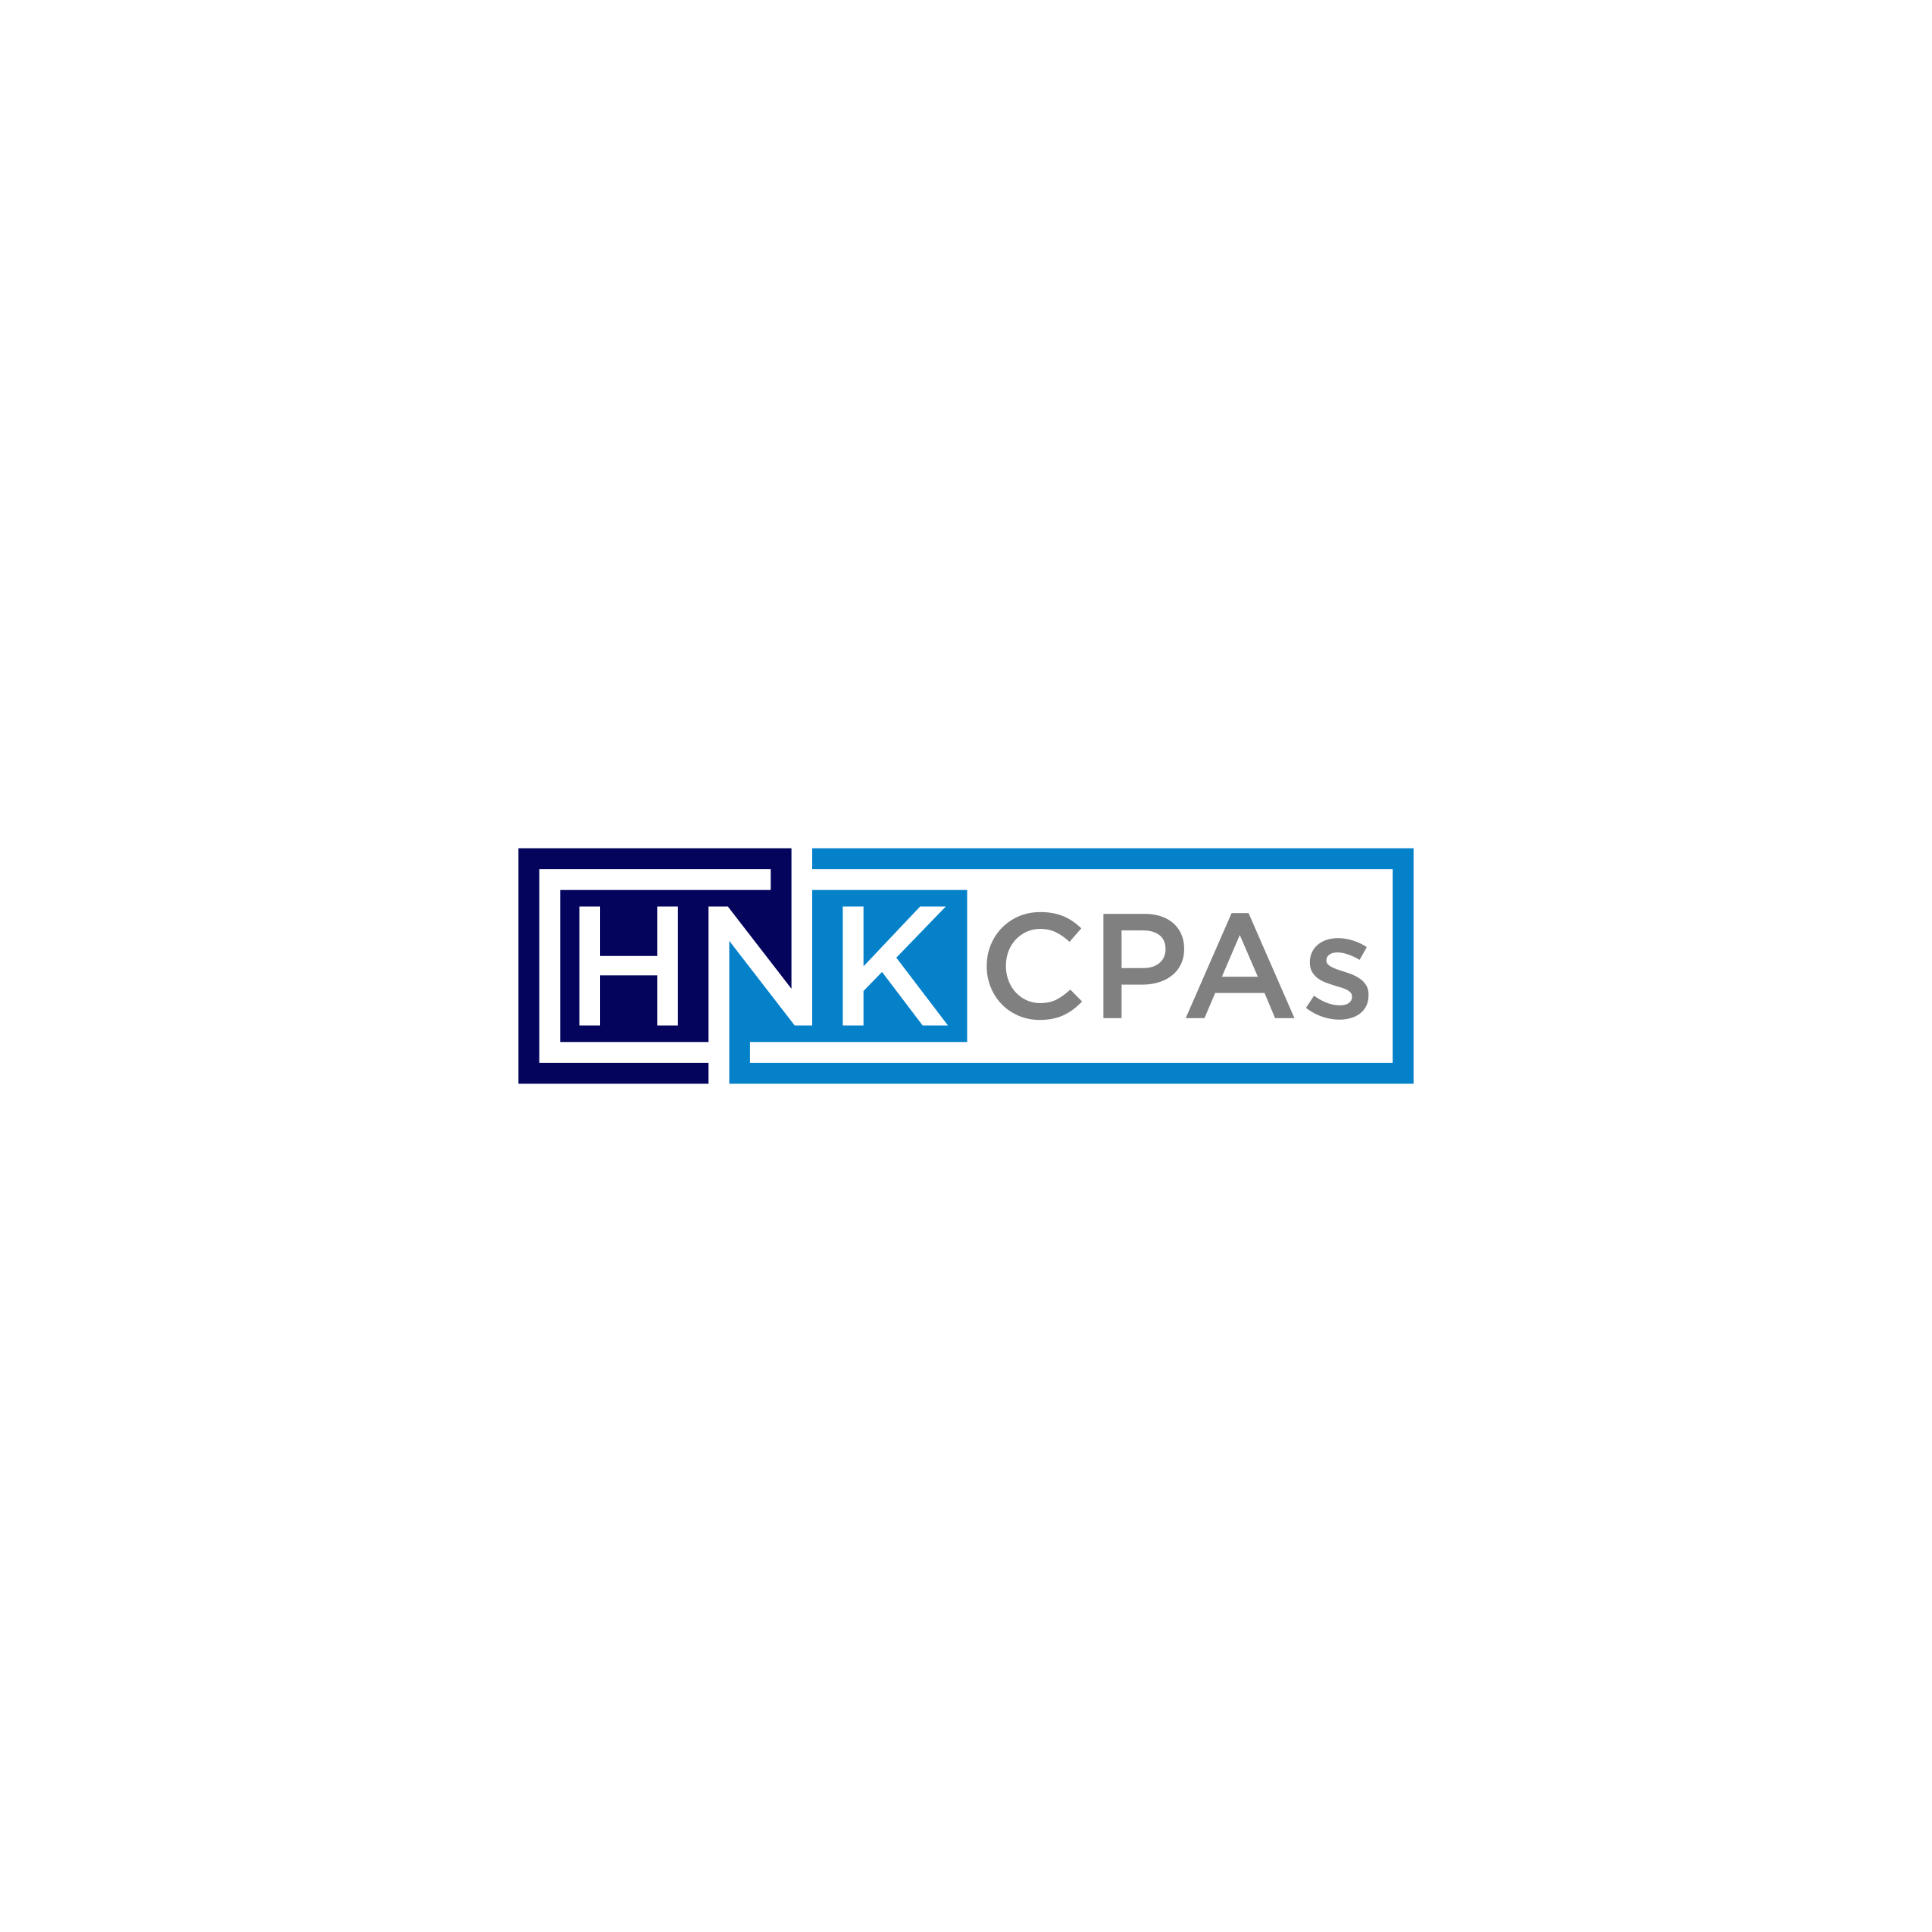 HNK CPAs